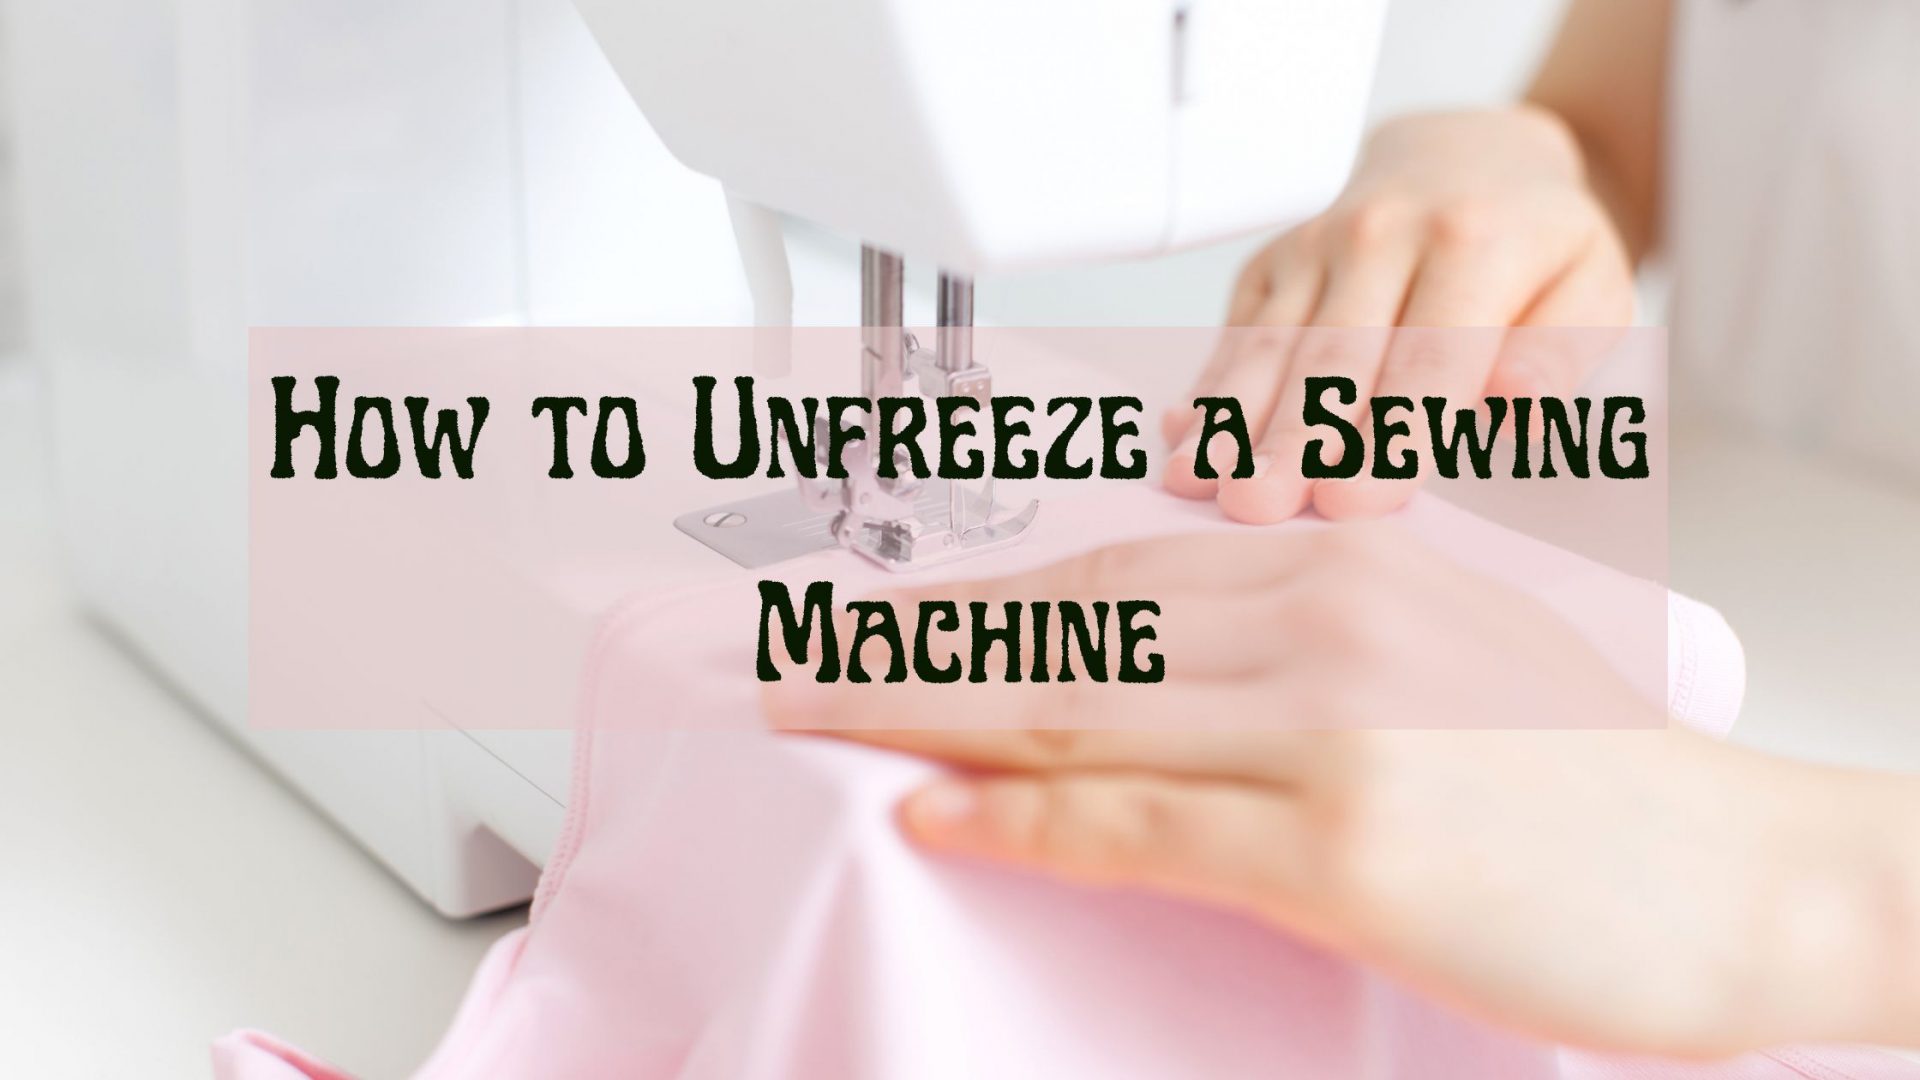 How to Unfreeze a Sewing Machine